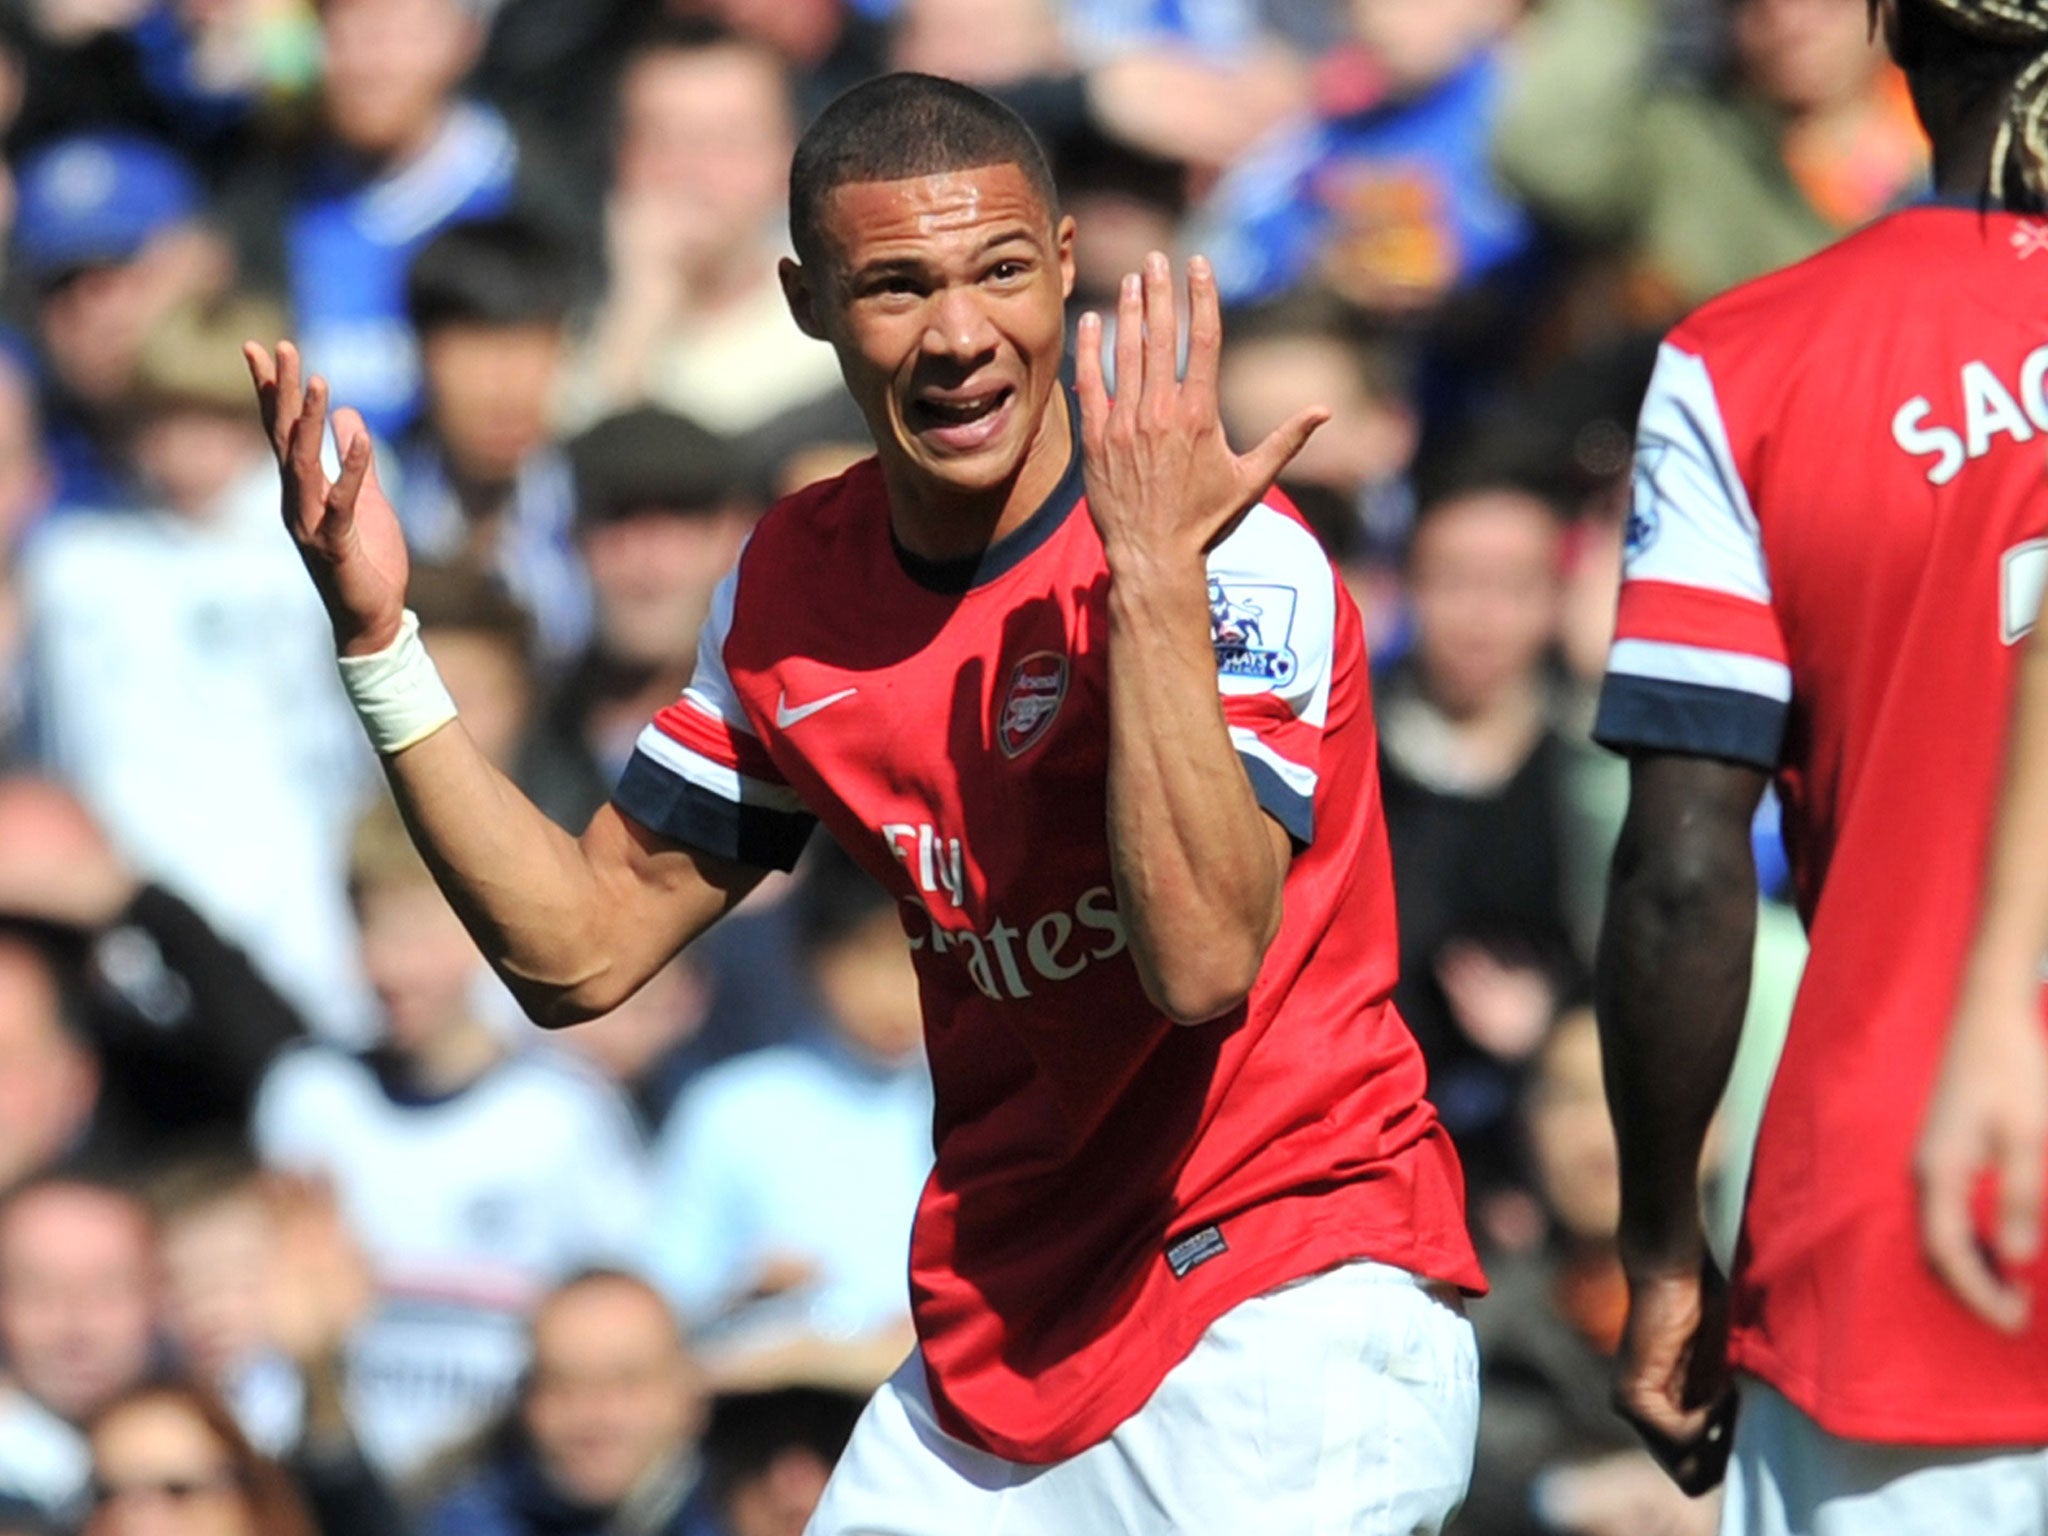 Arsenal hope to have Kieran Gibbs available against Swansea City